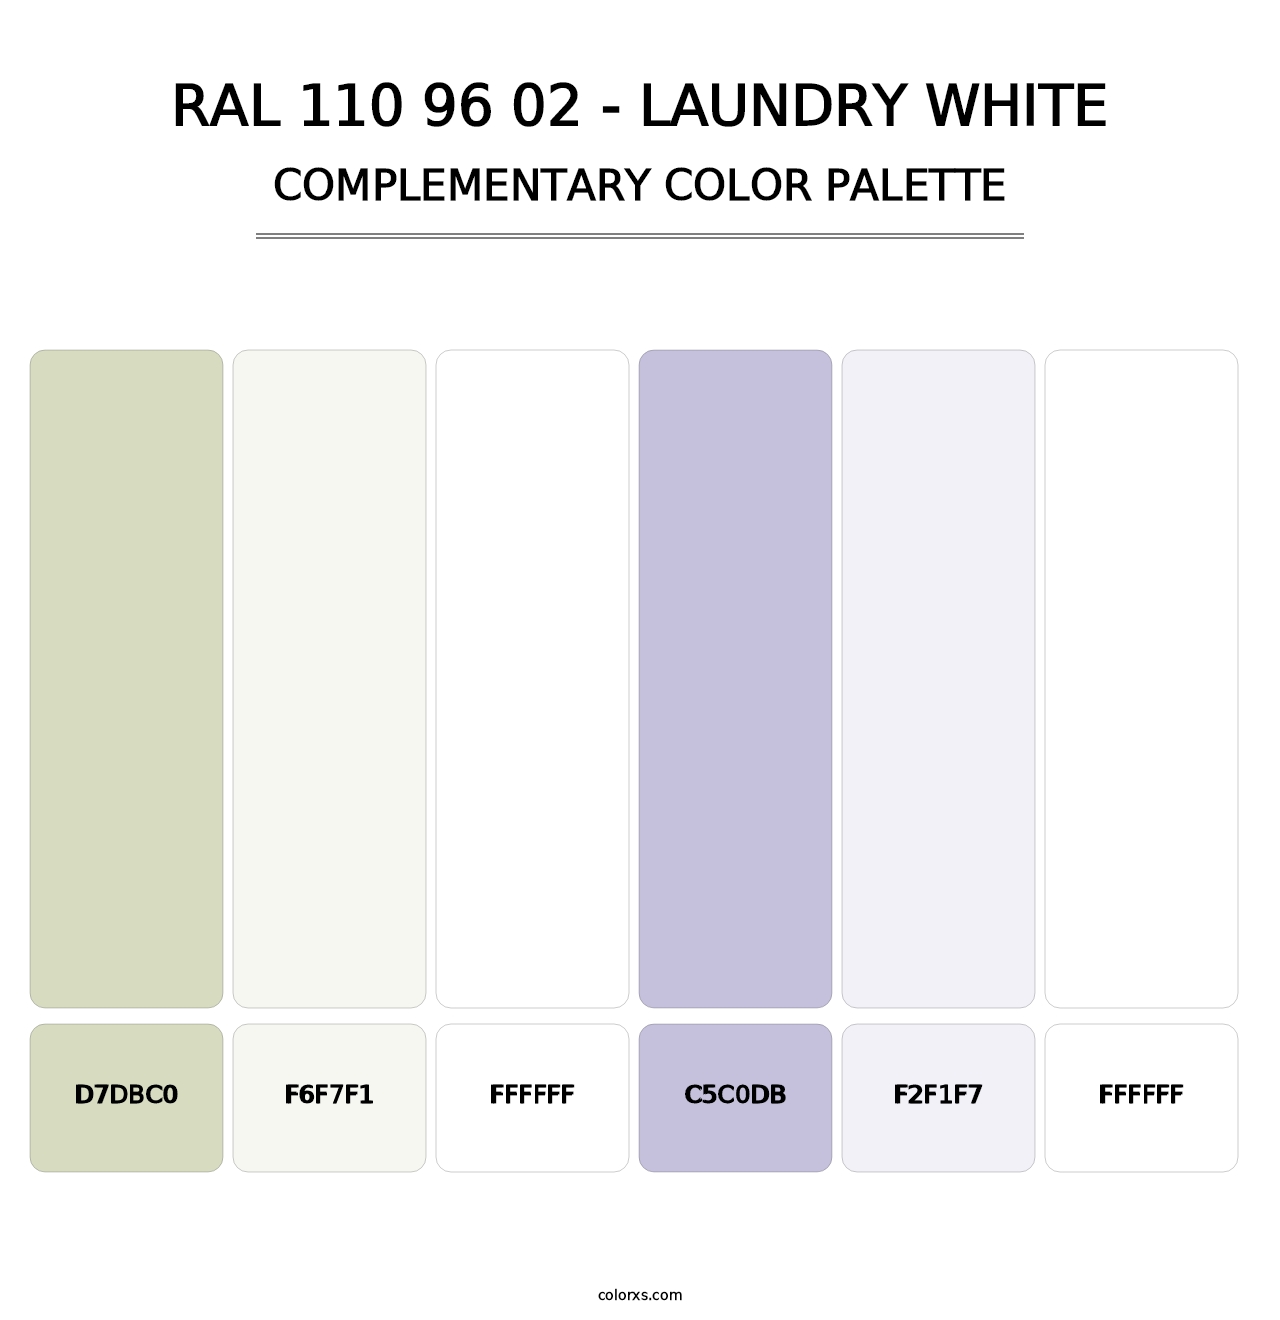 RAL 110 96 02 - Laundry White - Complementary Color Palette